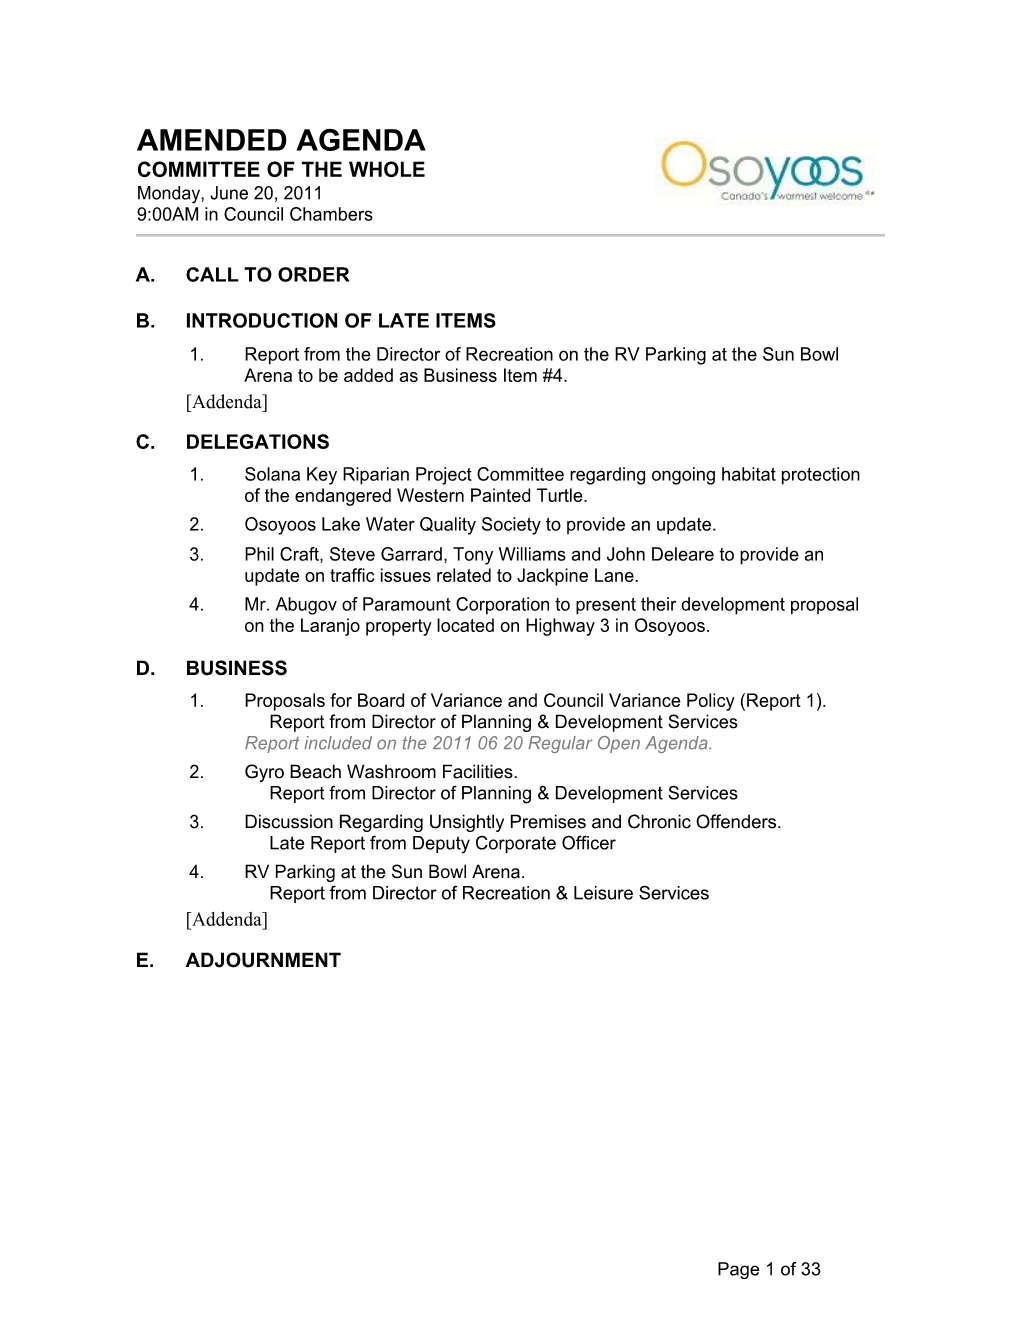 AMENDED AGENDA COMMITTEE of the WHOLE Monday, June 20, 2011 9:00AM in Council Chambers